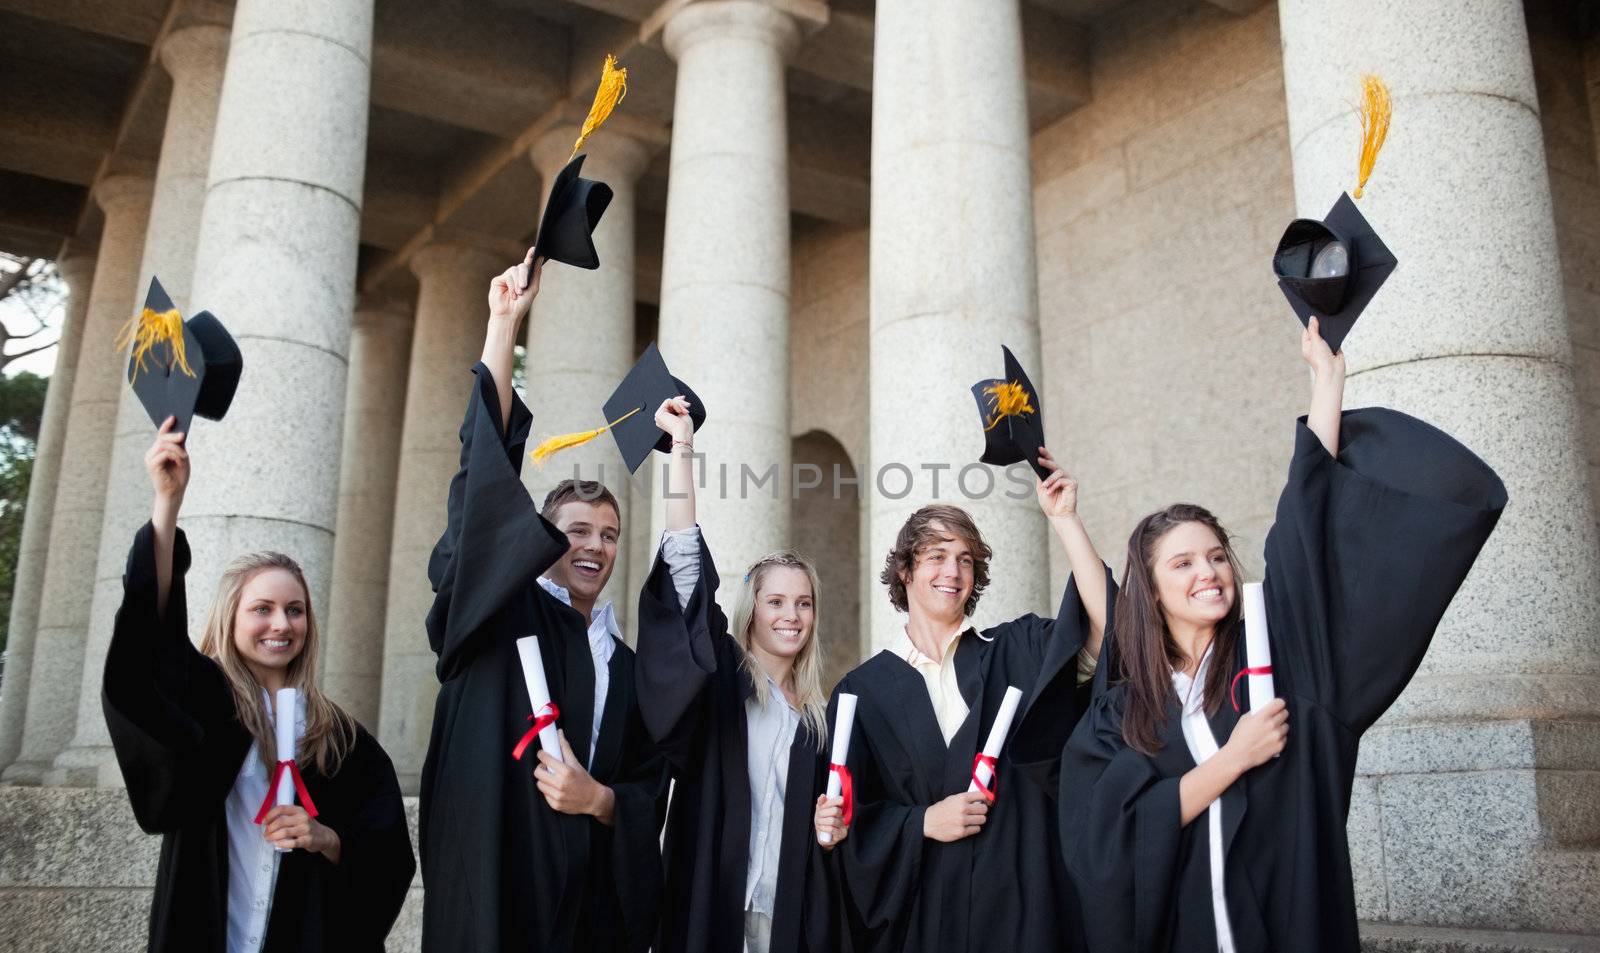 Smiling graduates holding up their hats in front of the university